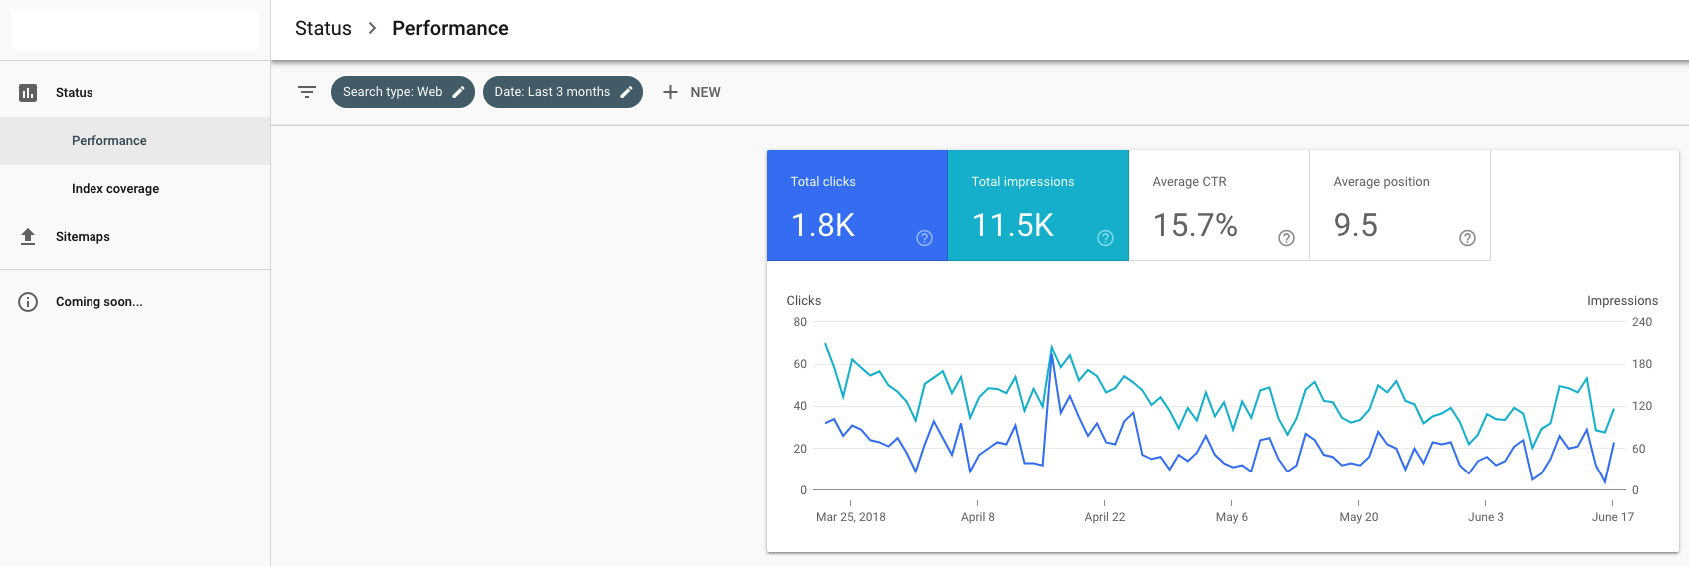 seo optimization result tracking google search console